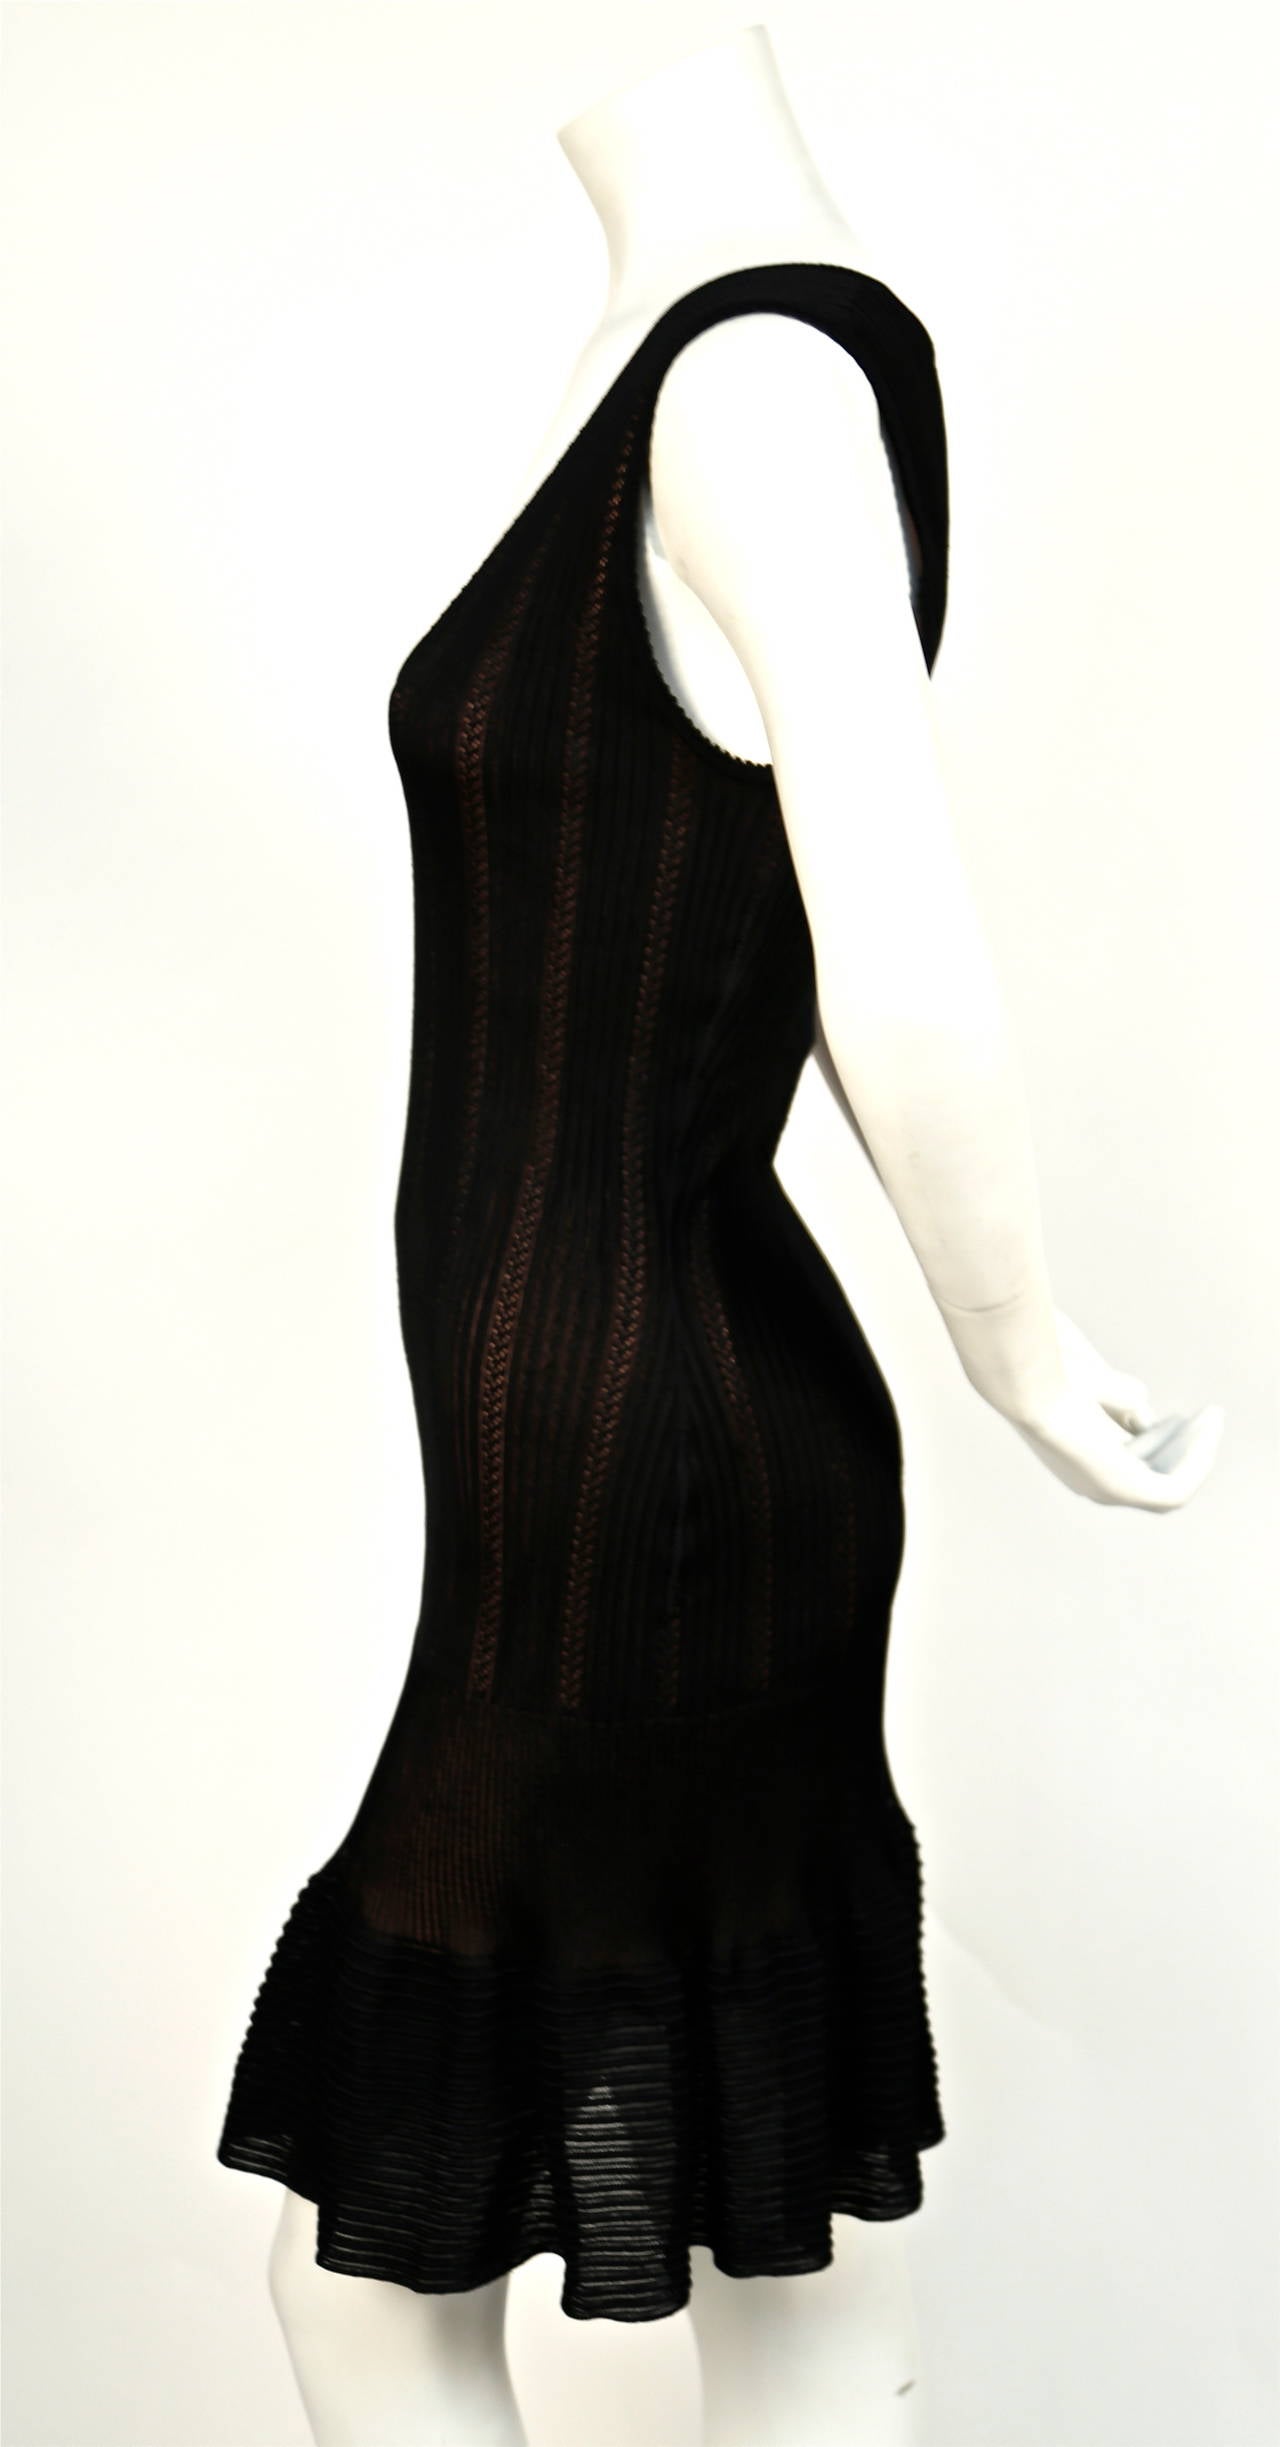 Jet black semi sheer pointelle knit dress with nude lining and deep V neckline designed by Azzedine Alaia dating to the early 1990's. Dress best fits a size S or M. Approximate measurements are as follows: bust 32